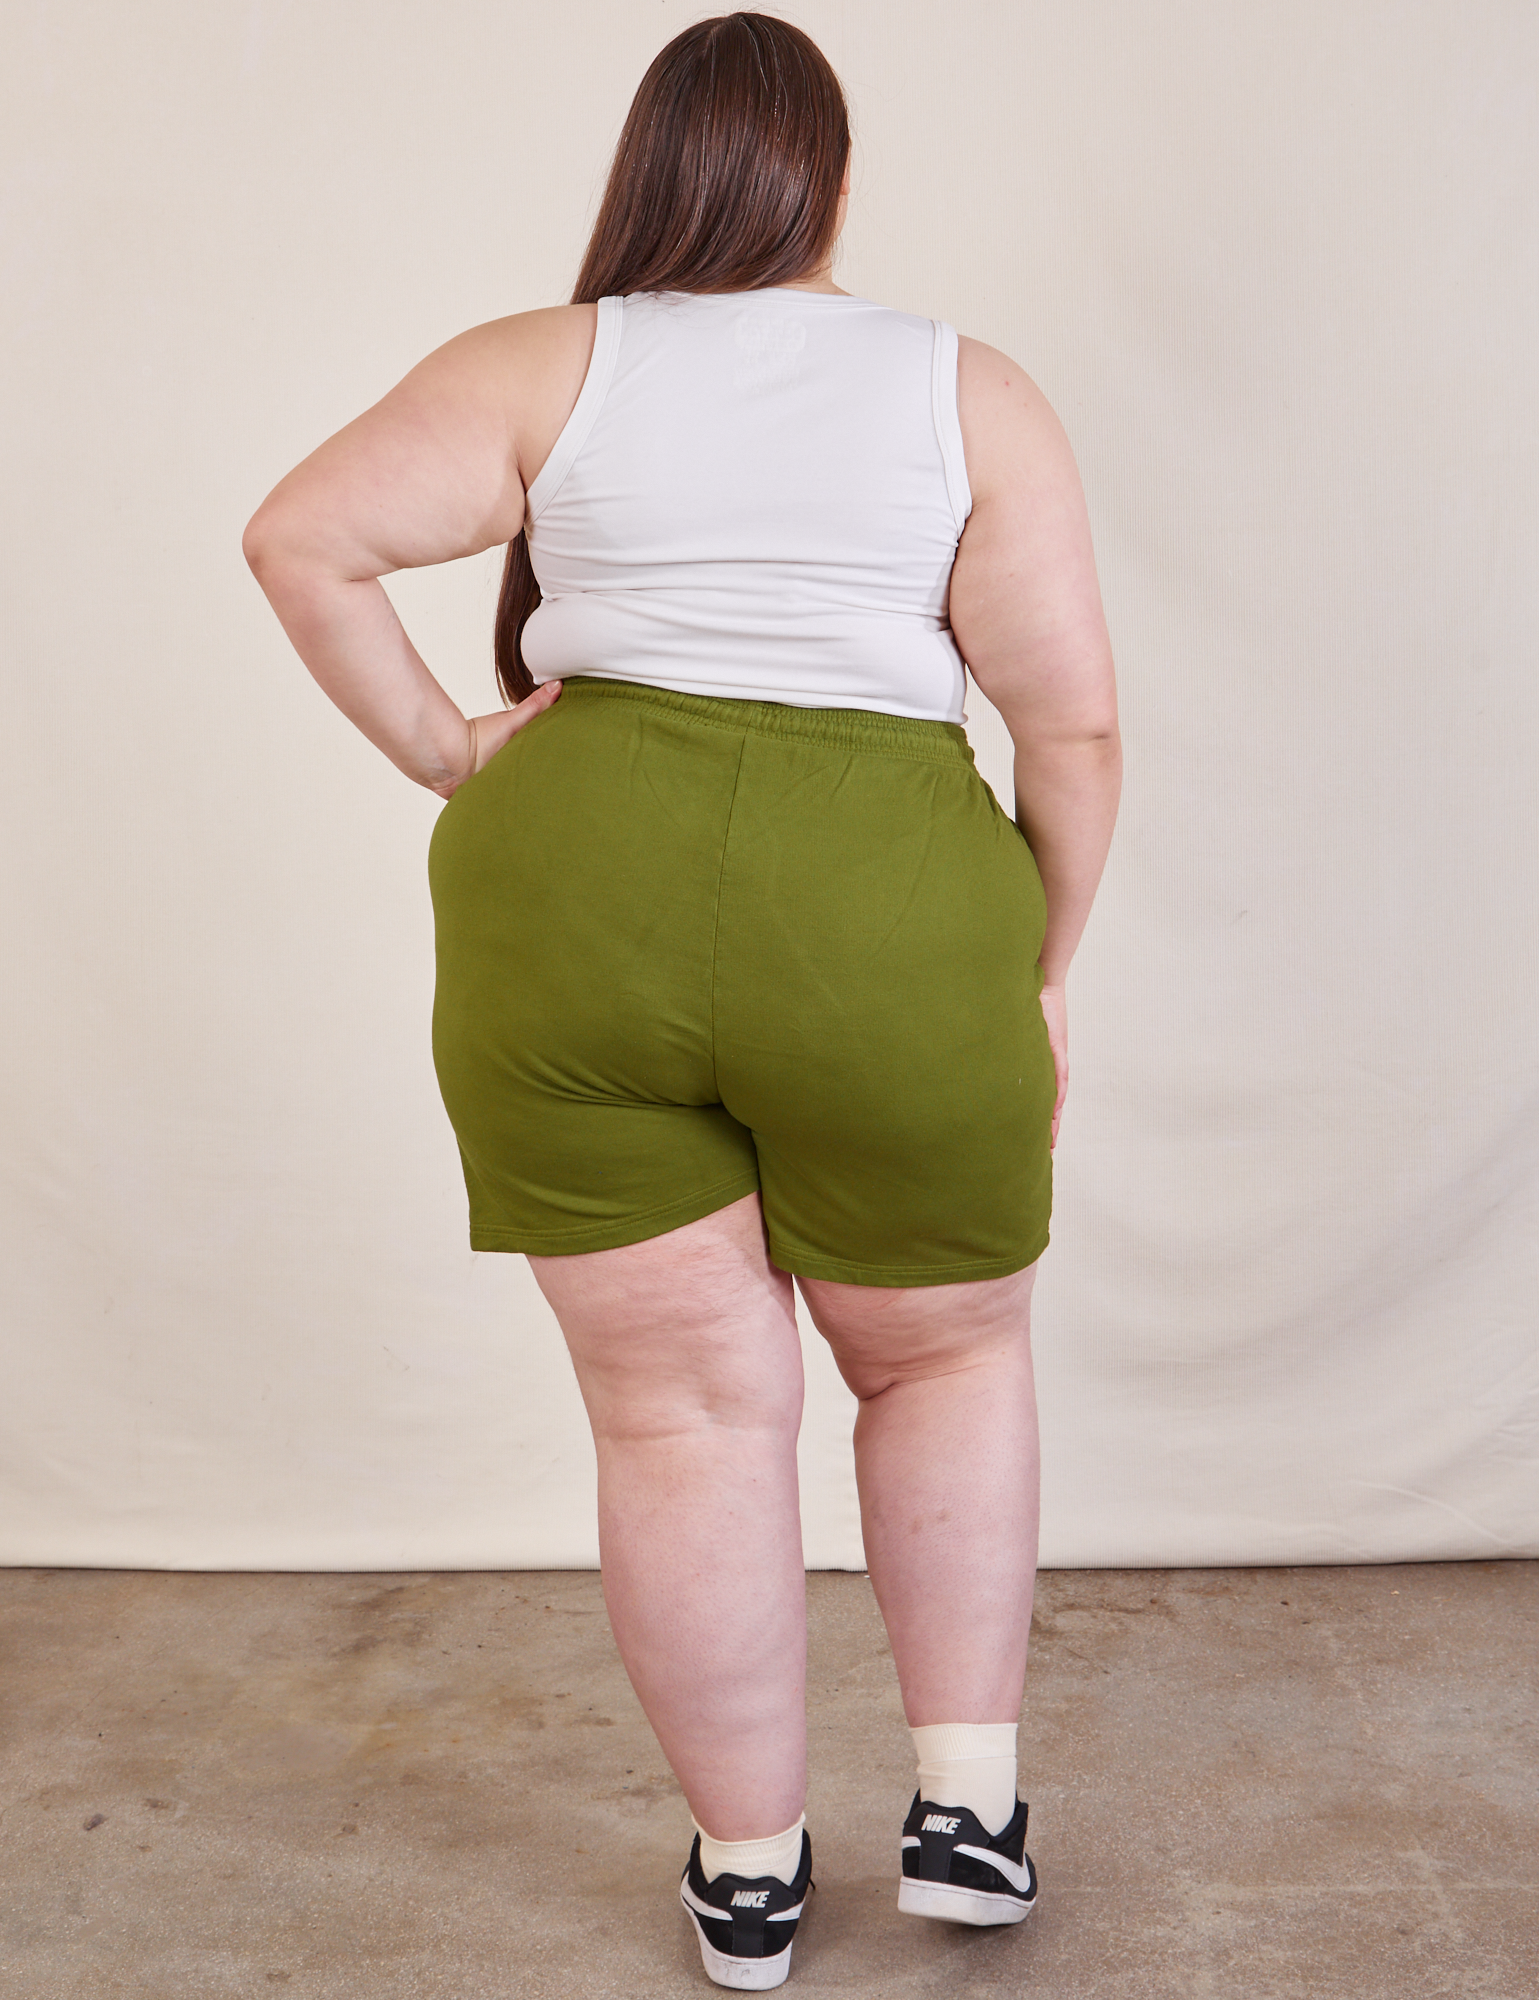 Back view of Lightweight Sweat Shorts in Summer Olive and Cropped Tank in vintage tee off-white on Marielena